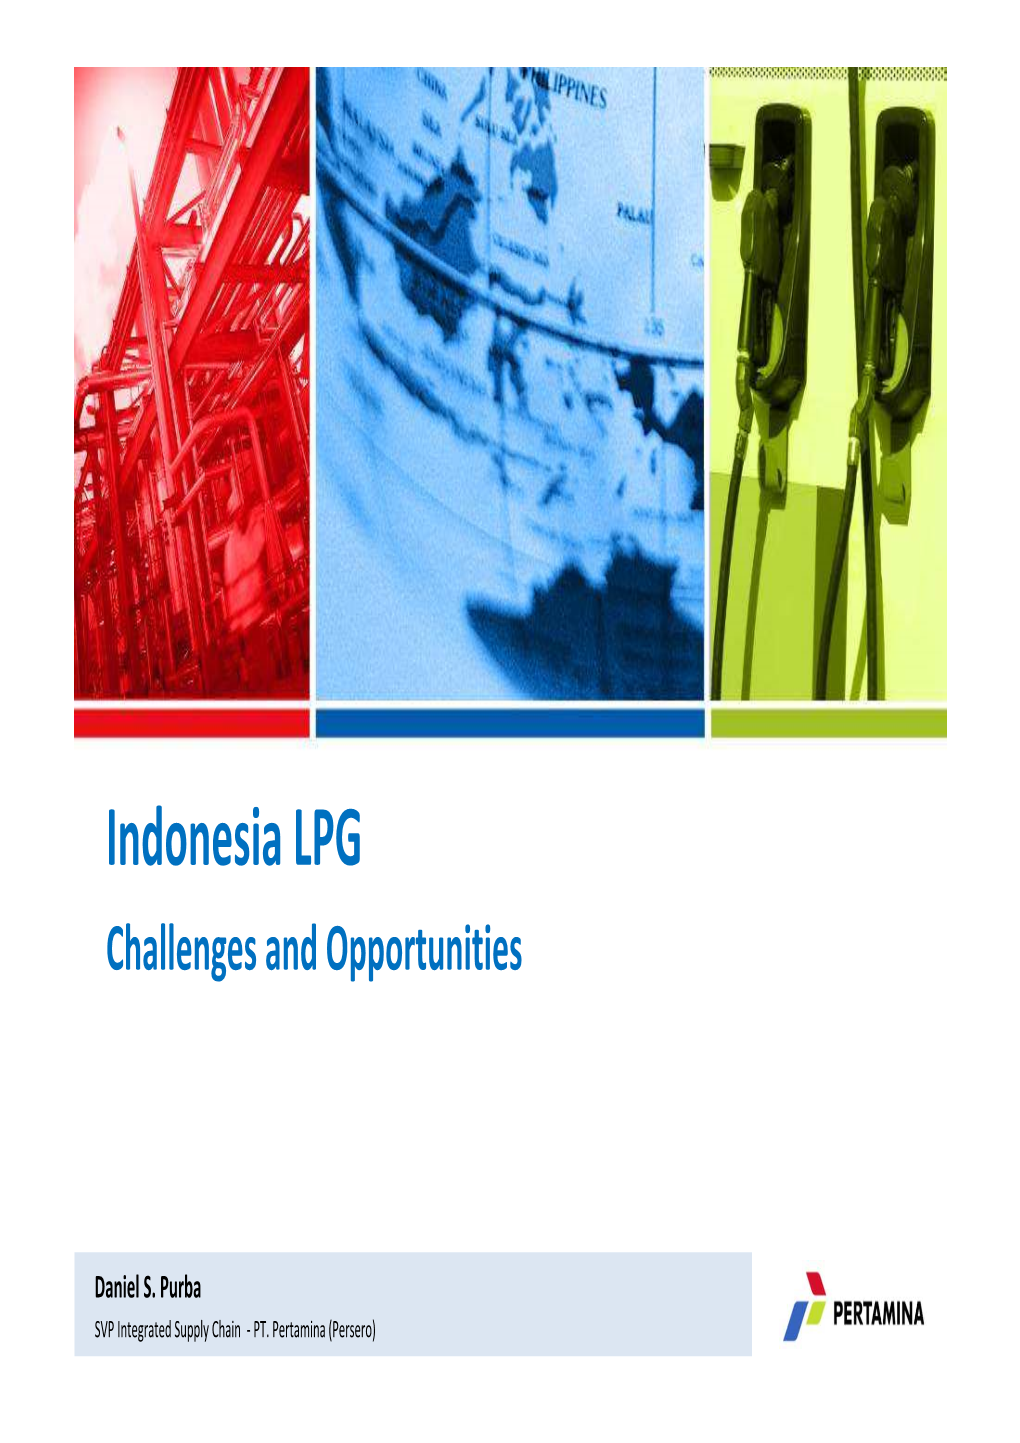 Indonesia LPG Challenges and Opportunities